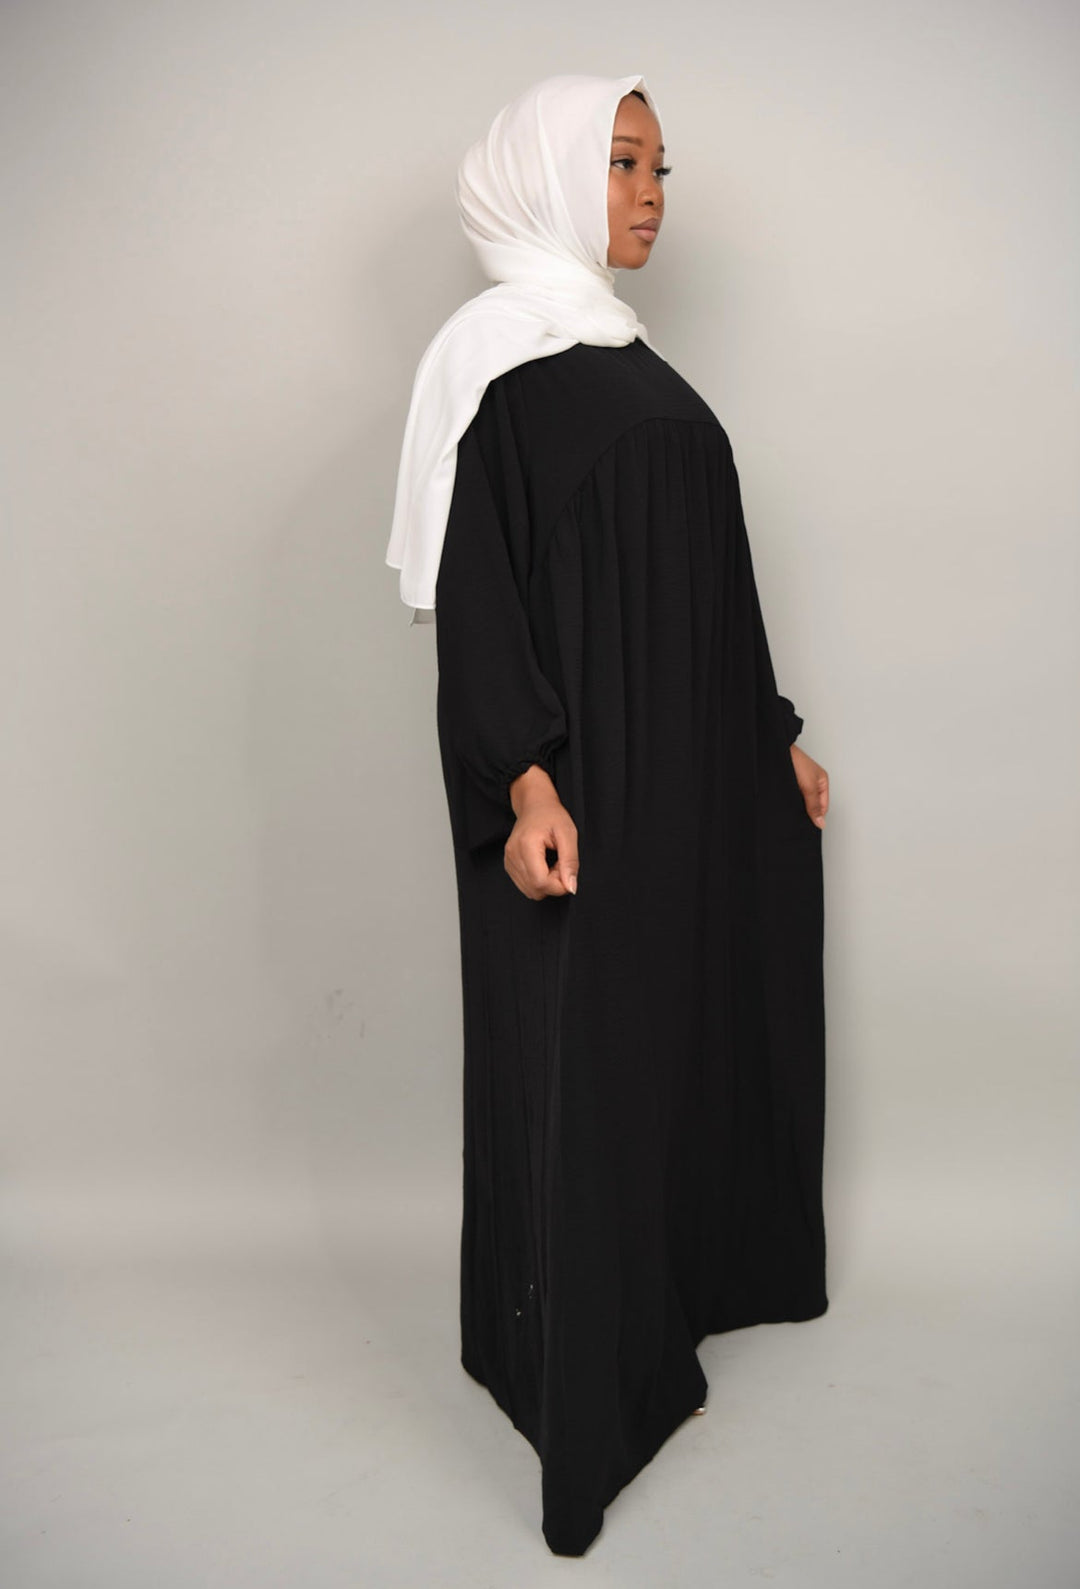 Get trendy with Amelia Textured Abaya - Black -  available at Voilee NY. Grab yours for $54.90 today!